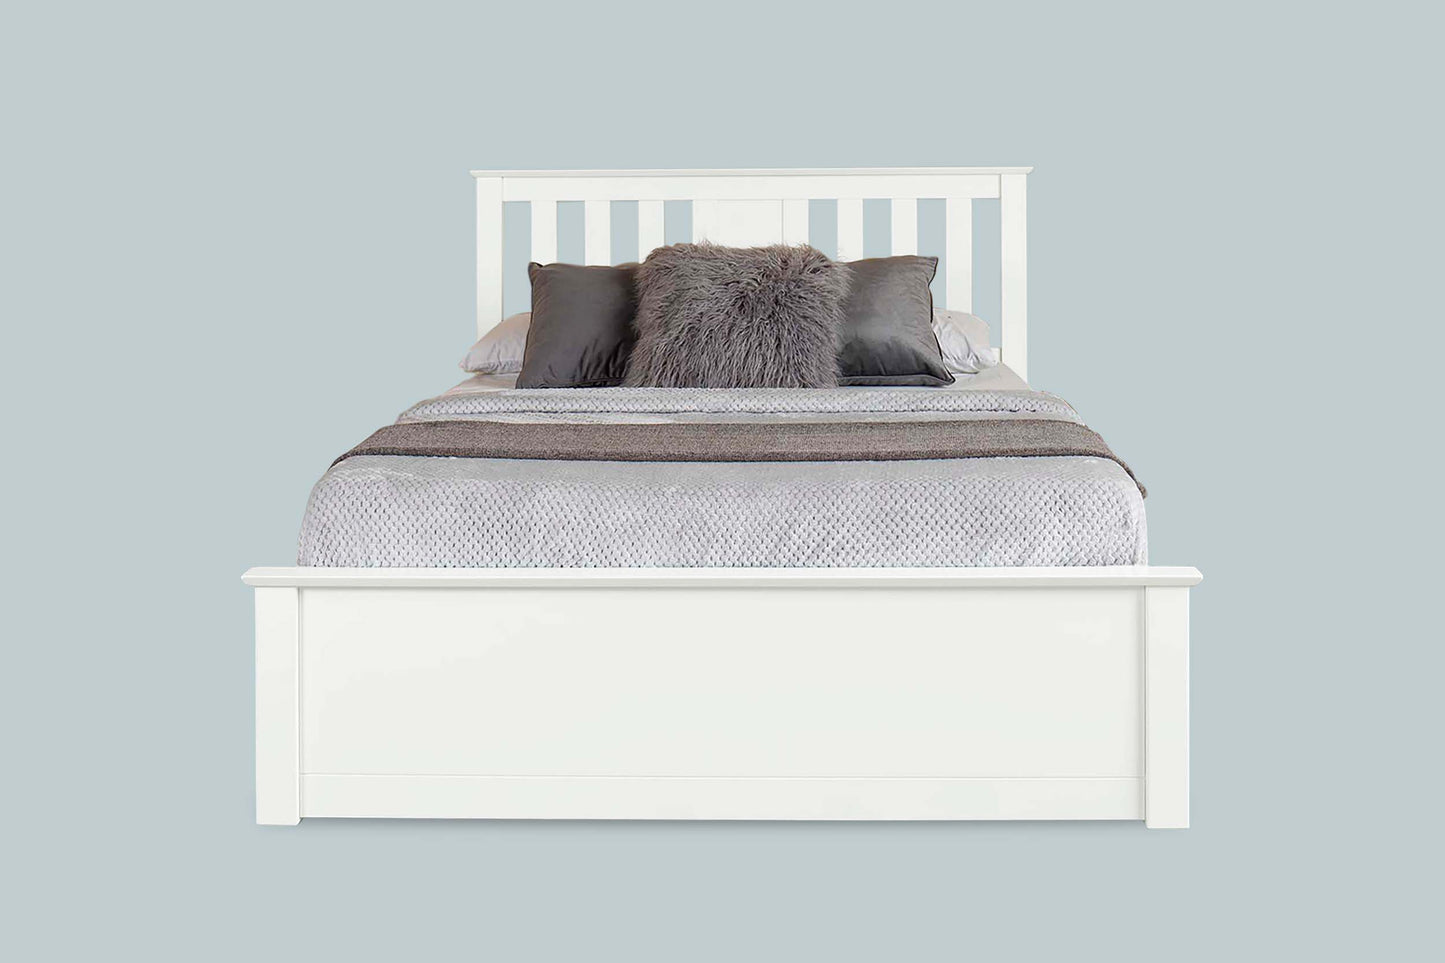 Chesterfield Ottoman Storage Bed Frame - 4ft6 Double - Bright White